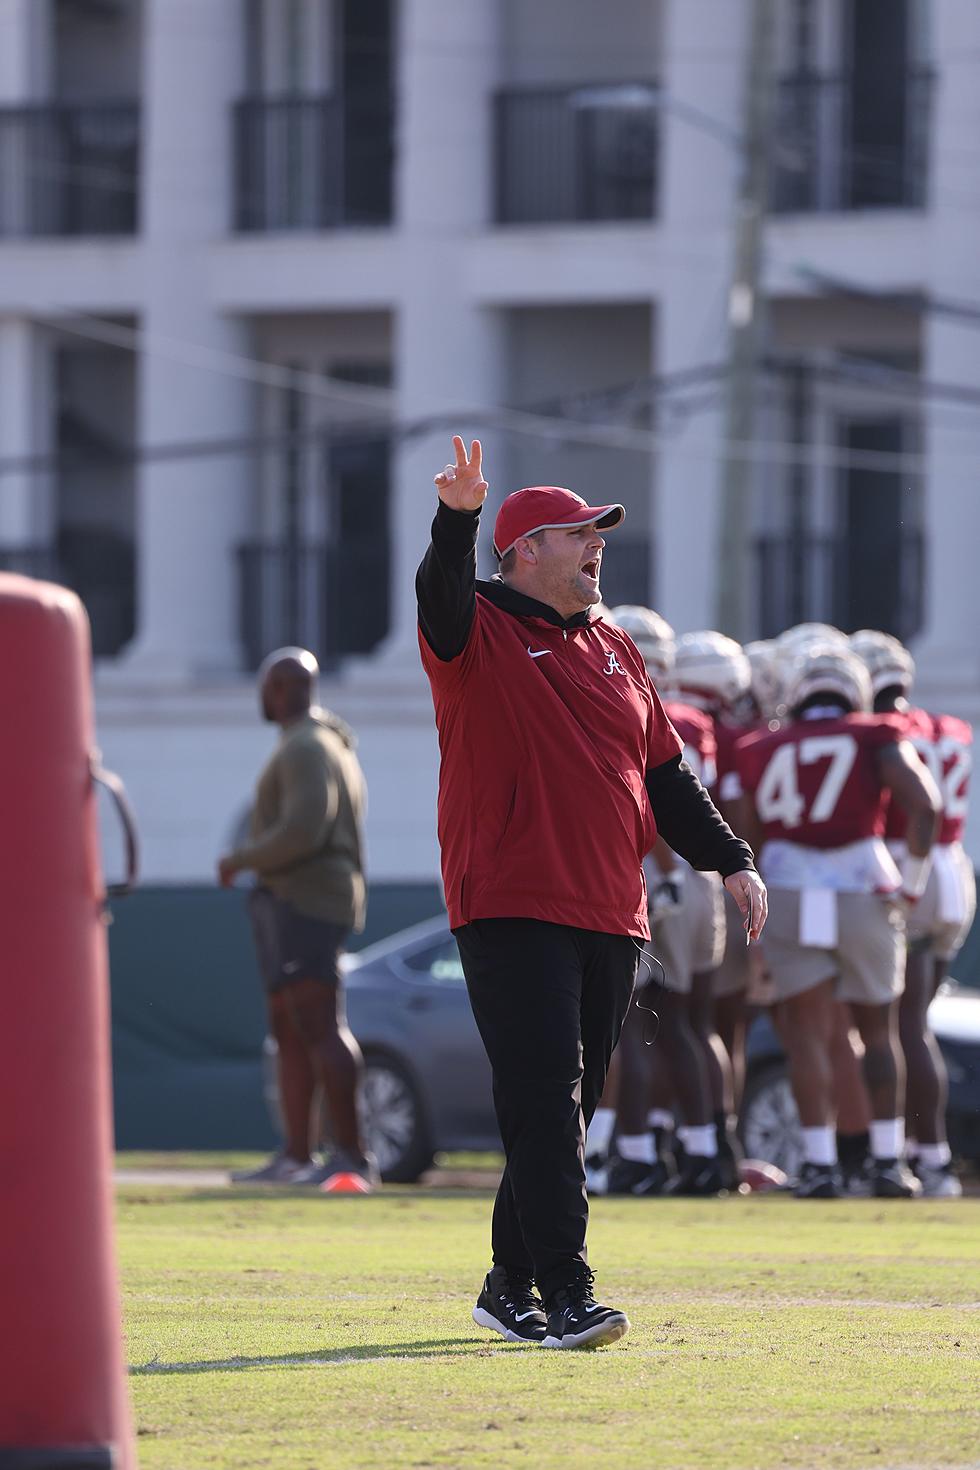 Alabama Defense Wants to be Leaders in Transition